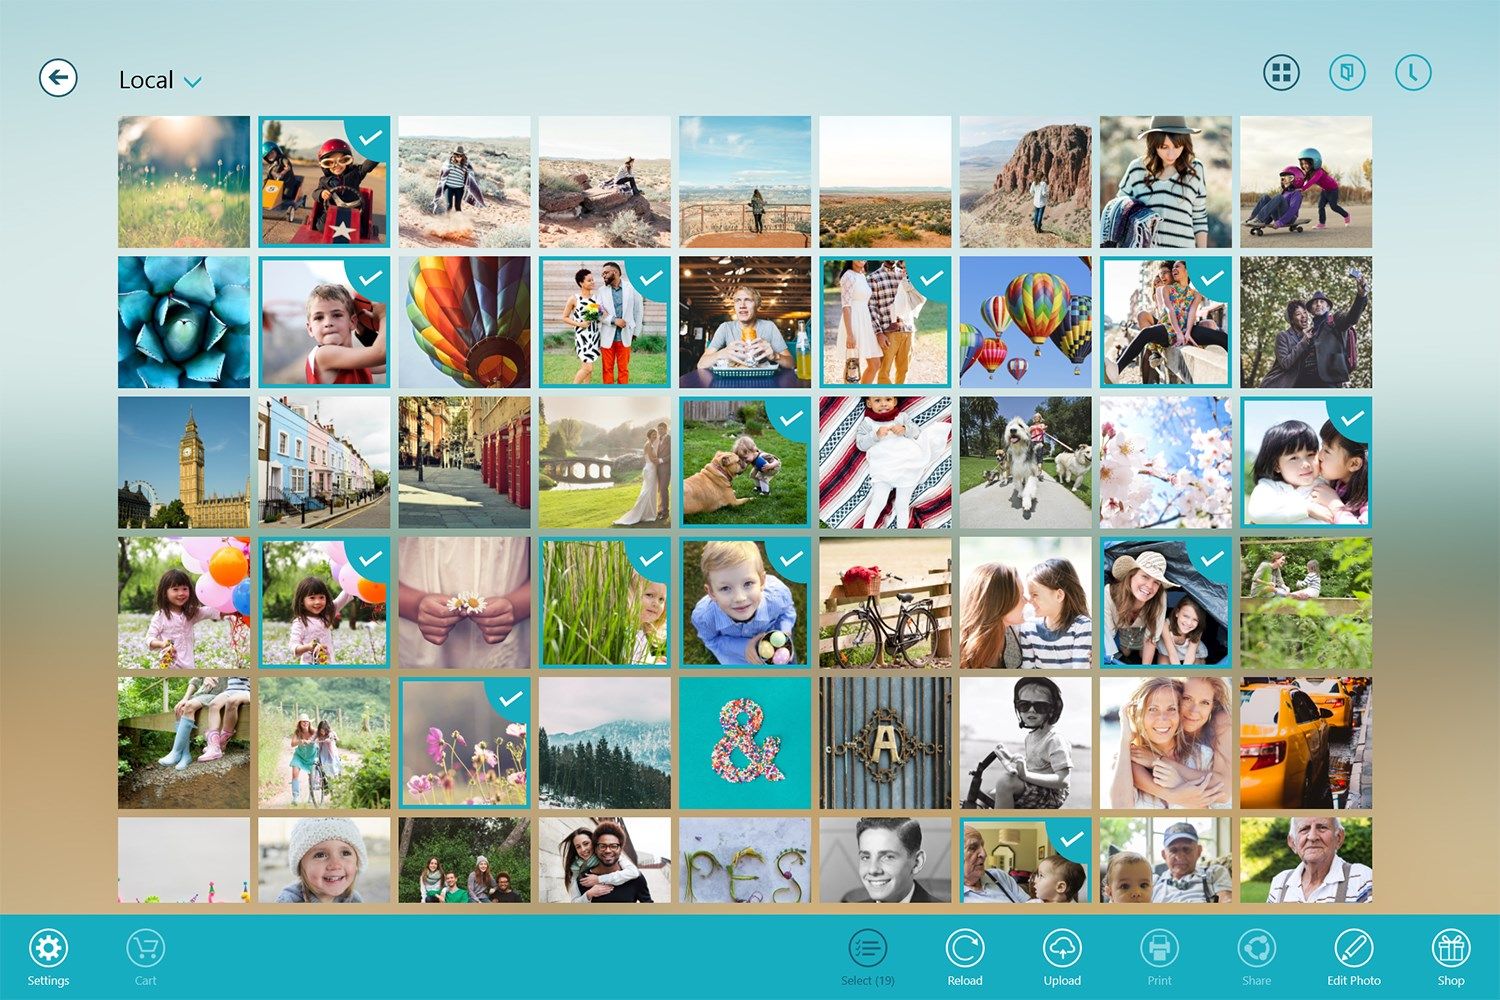 Completely new user experience to help you find your favorite photos quickly.